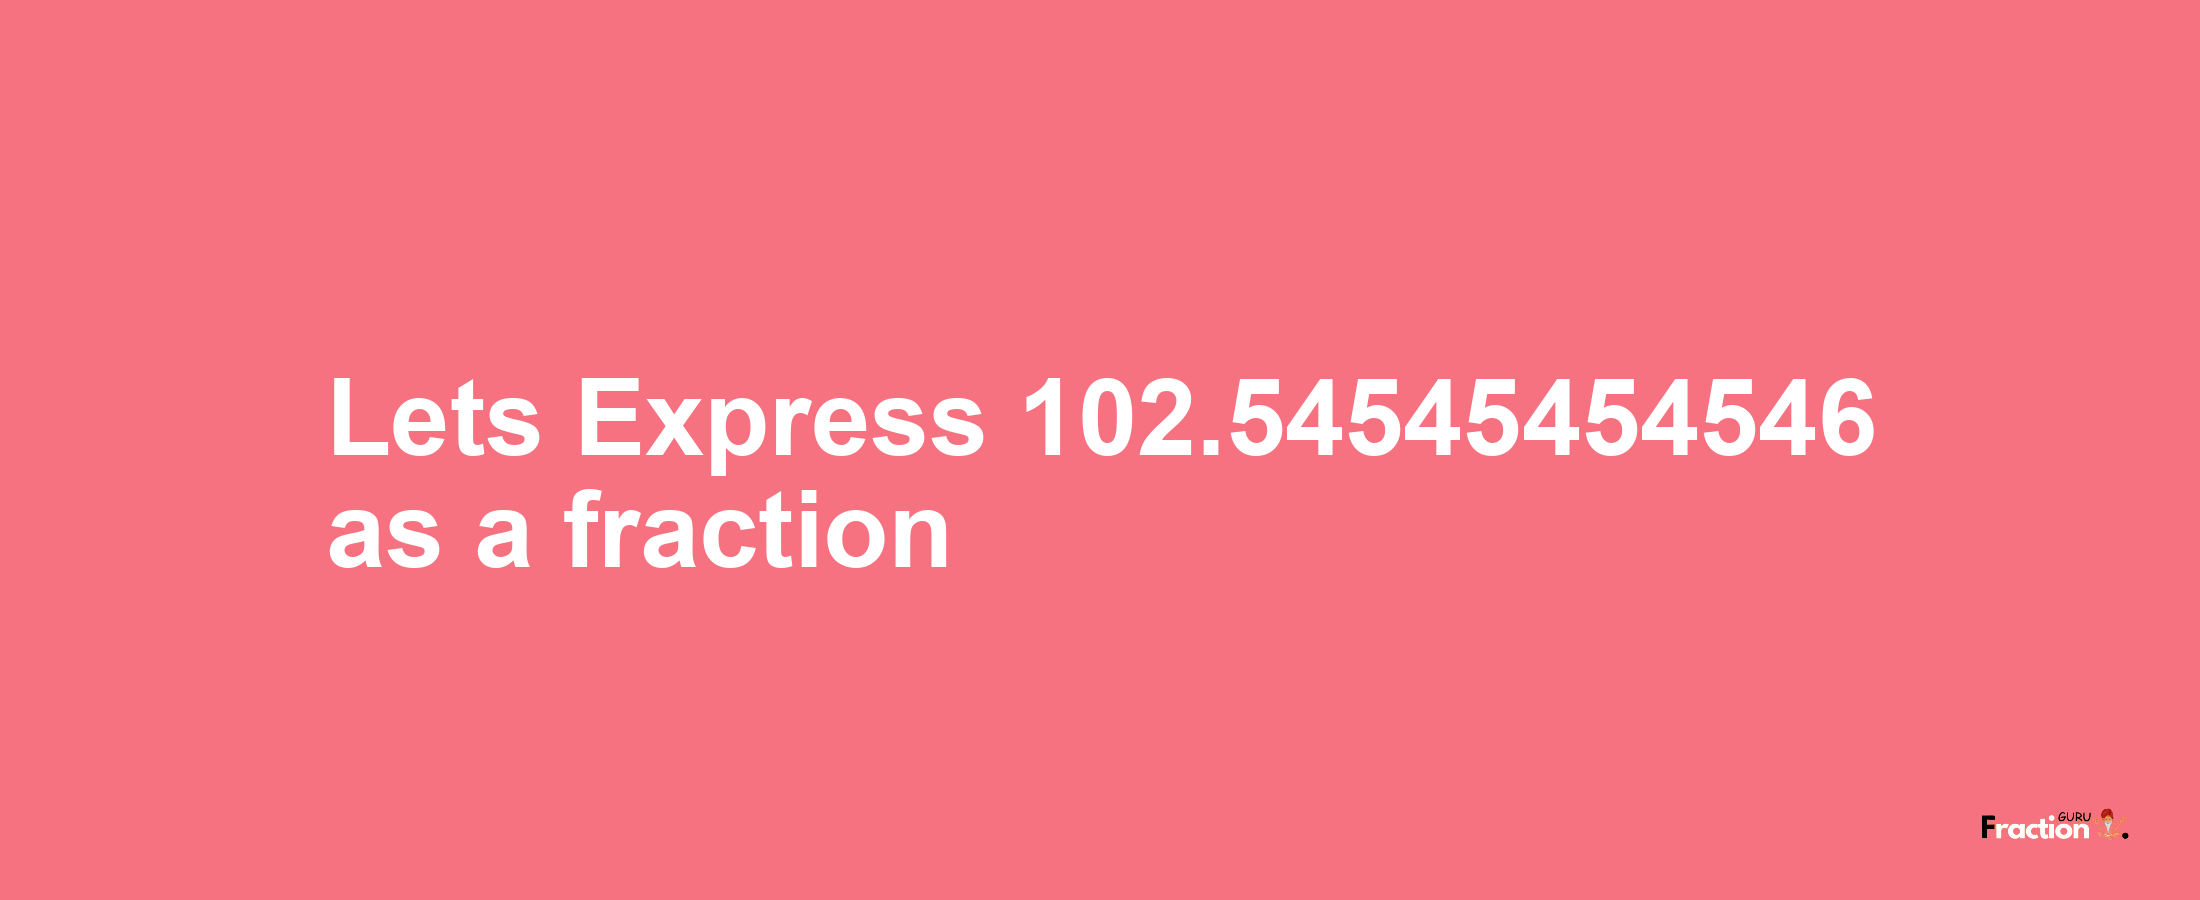 Lets Express 102.54545454546 as afraction